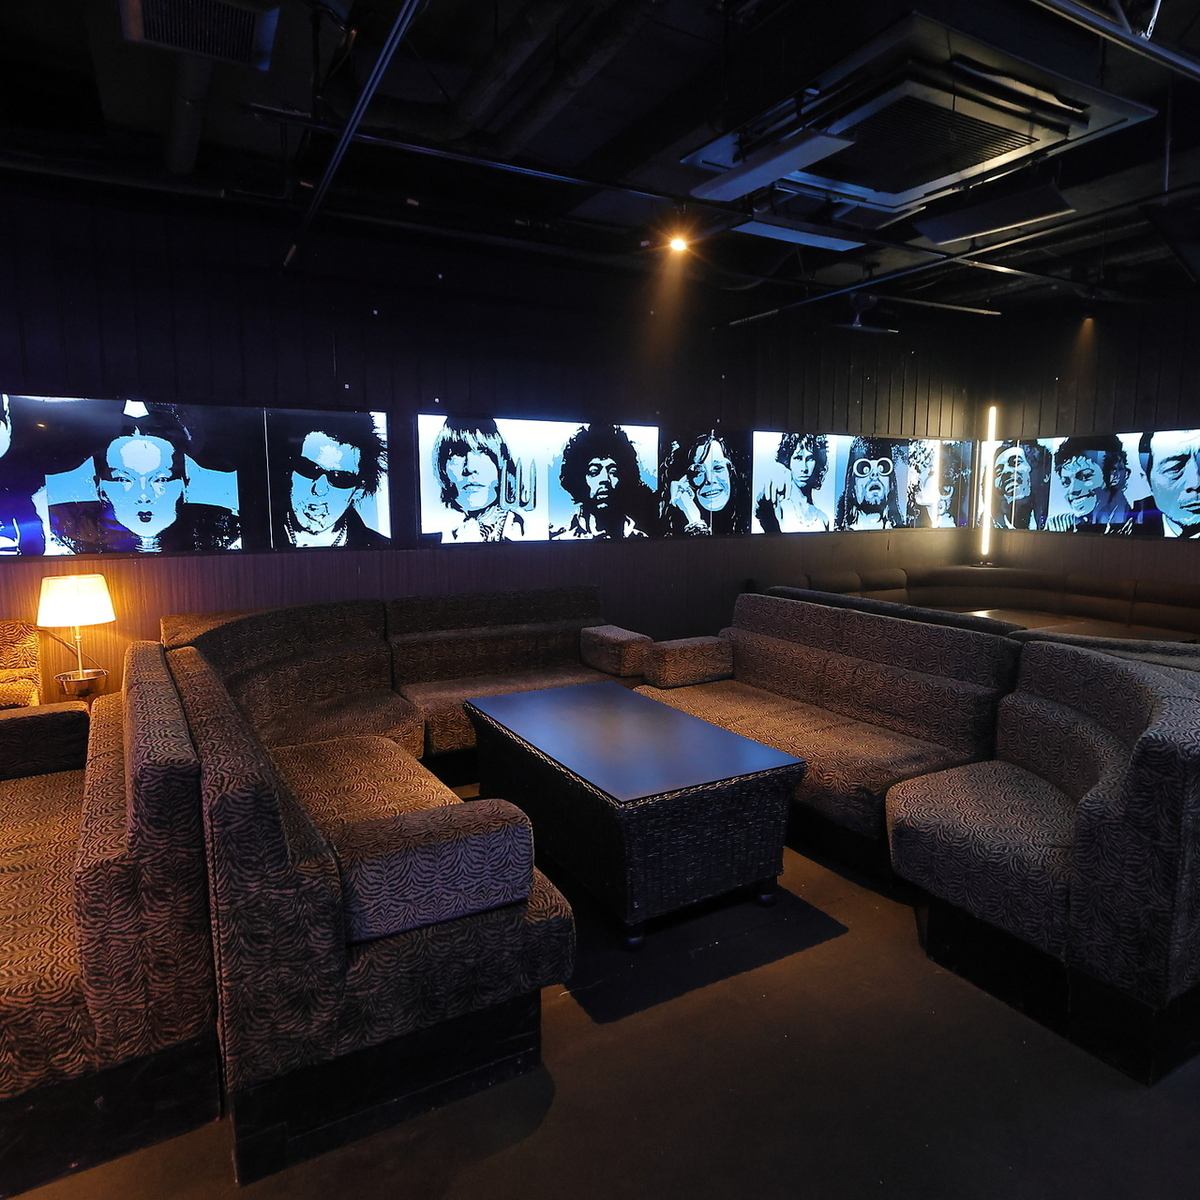 VIP private rooms with karaoke are available for 6 people and the entire floor can be reserved for 20 people or more.